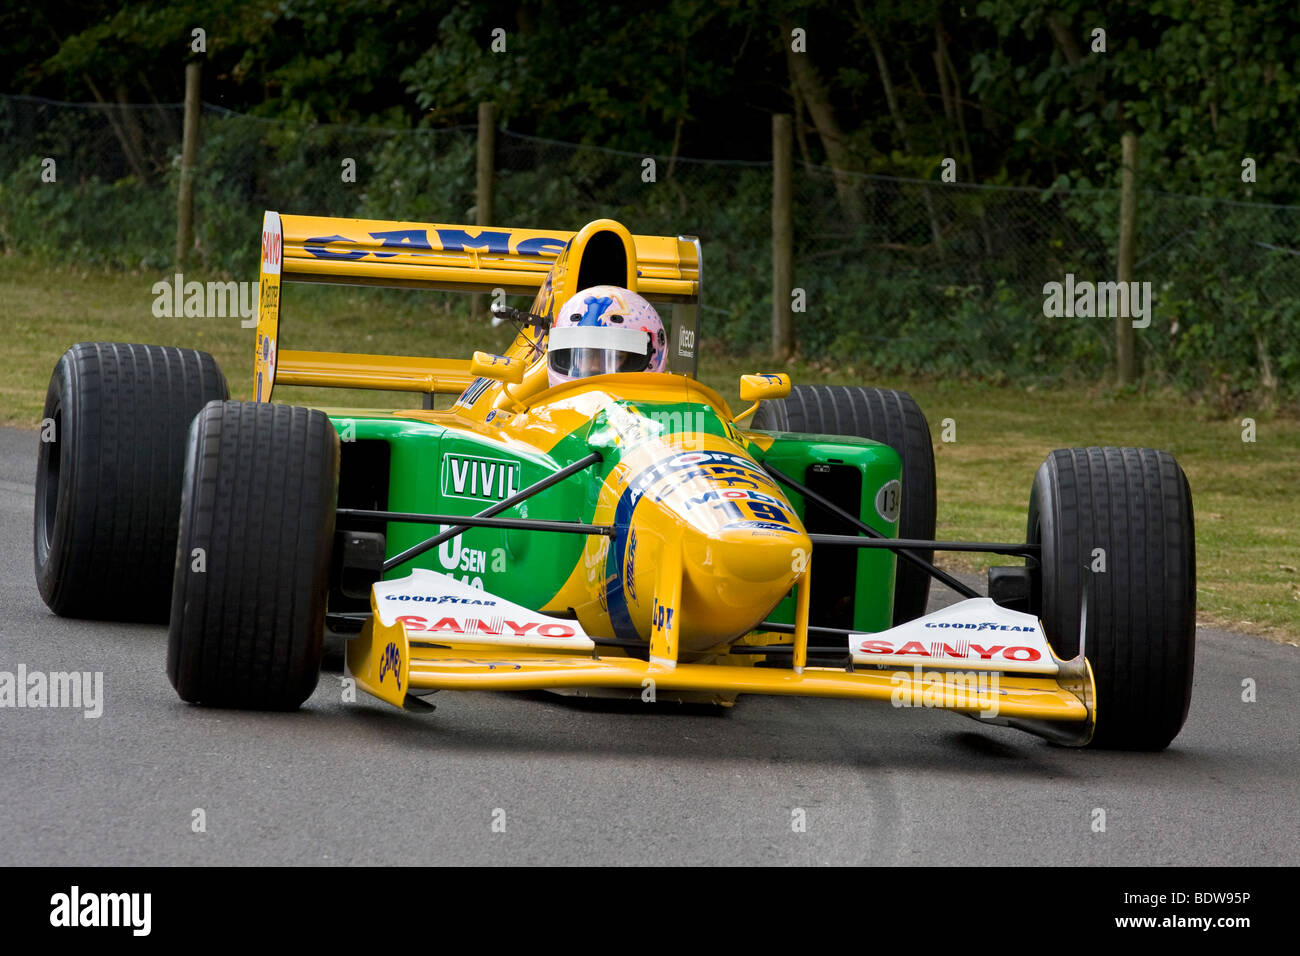 1992 Benetton-Ford B192 F1 car on the hillclimb at the 2009 Goodwood Festival of Speed, Sussex, UK. Driver: Lorina McLaughlin Stock Photo